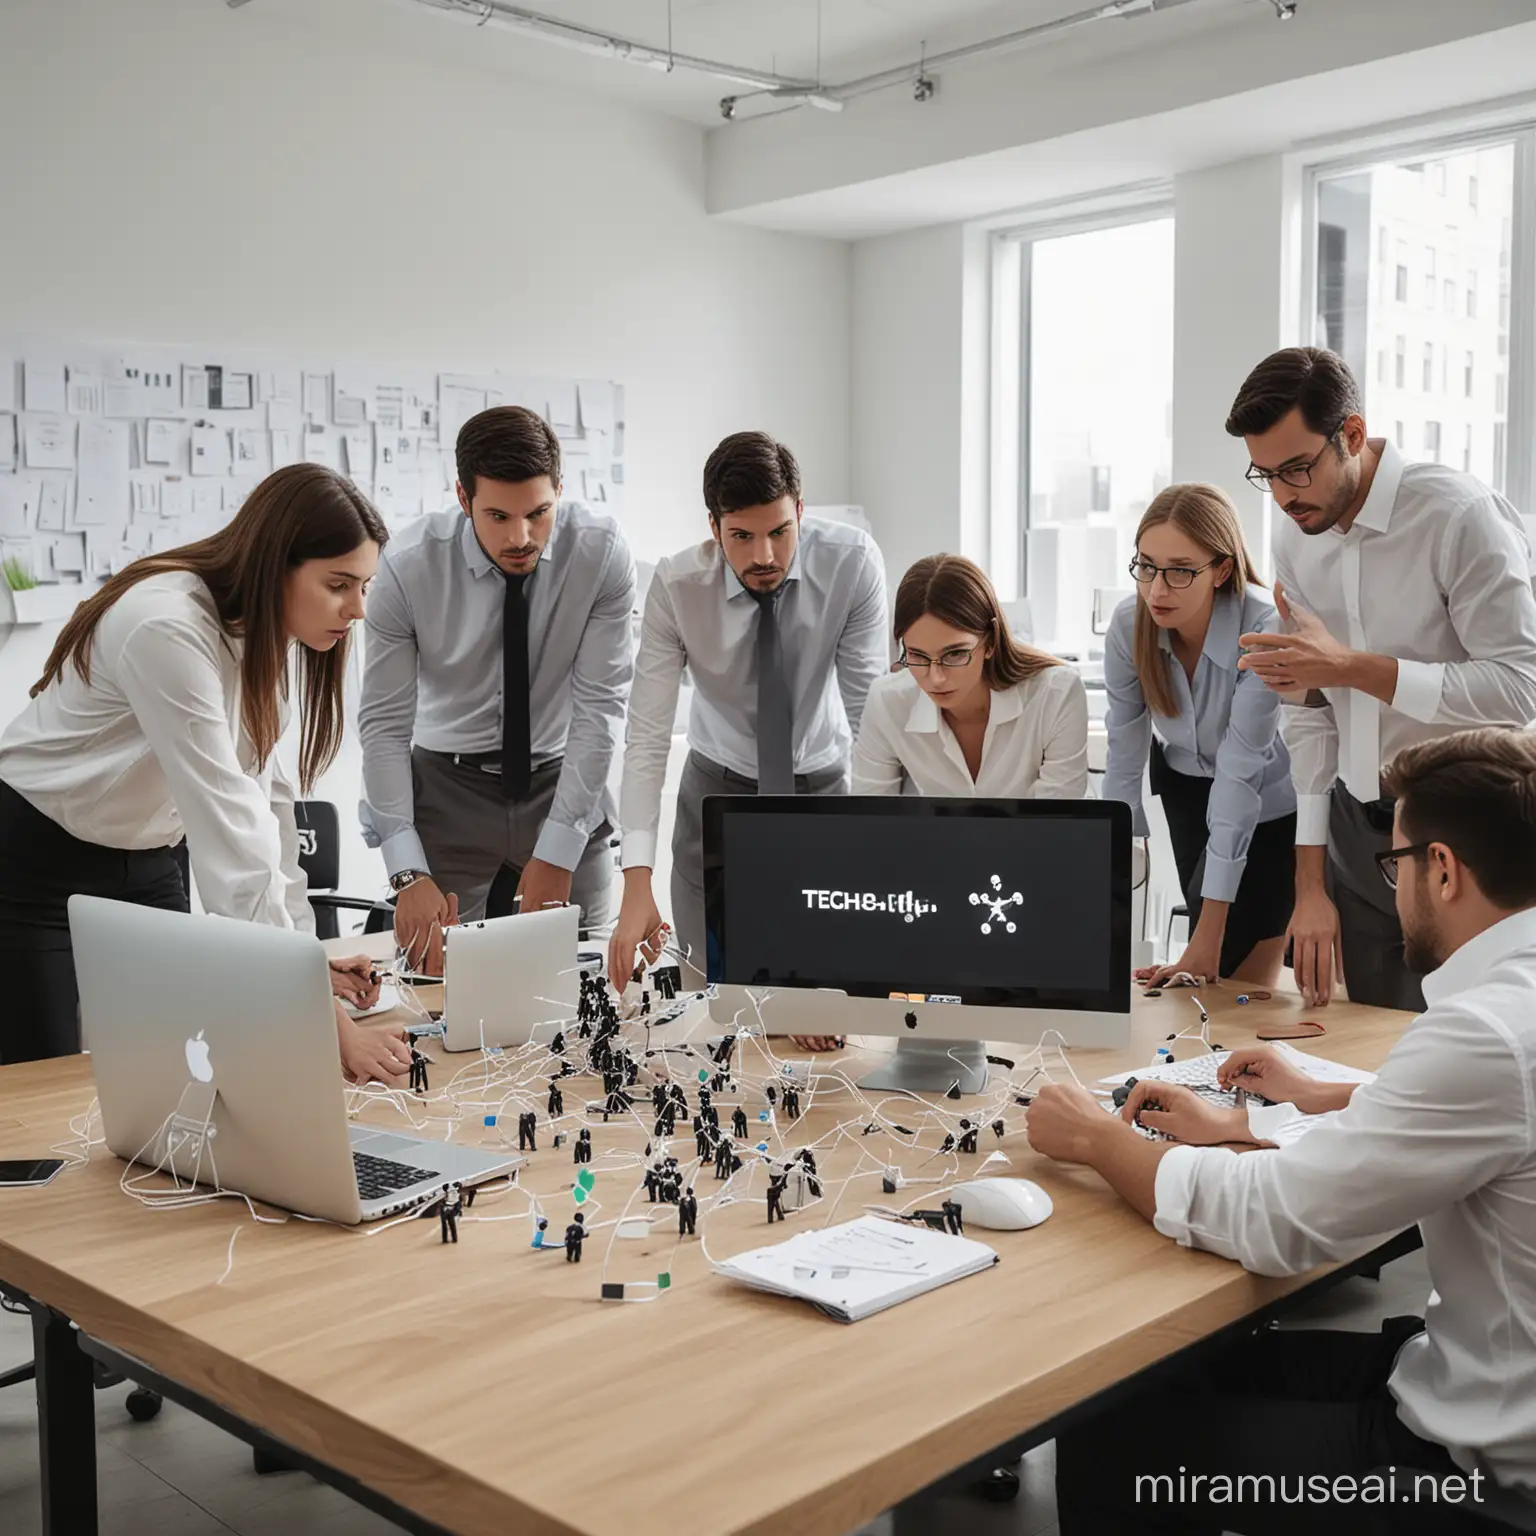 a situation where a person or group of business people try to solve a tech problem at the office